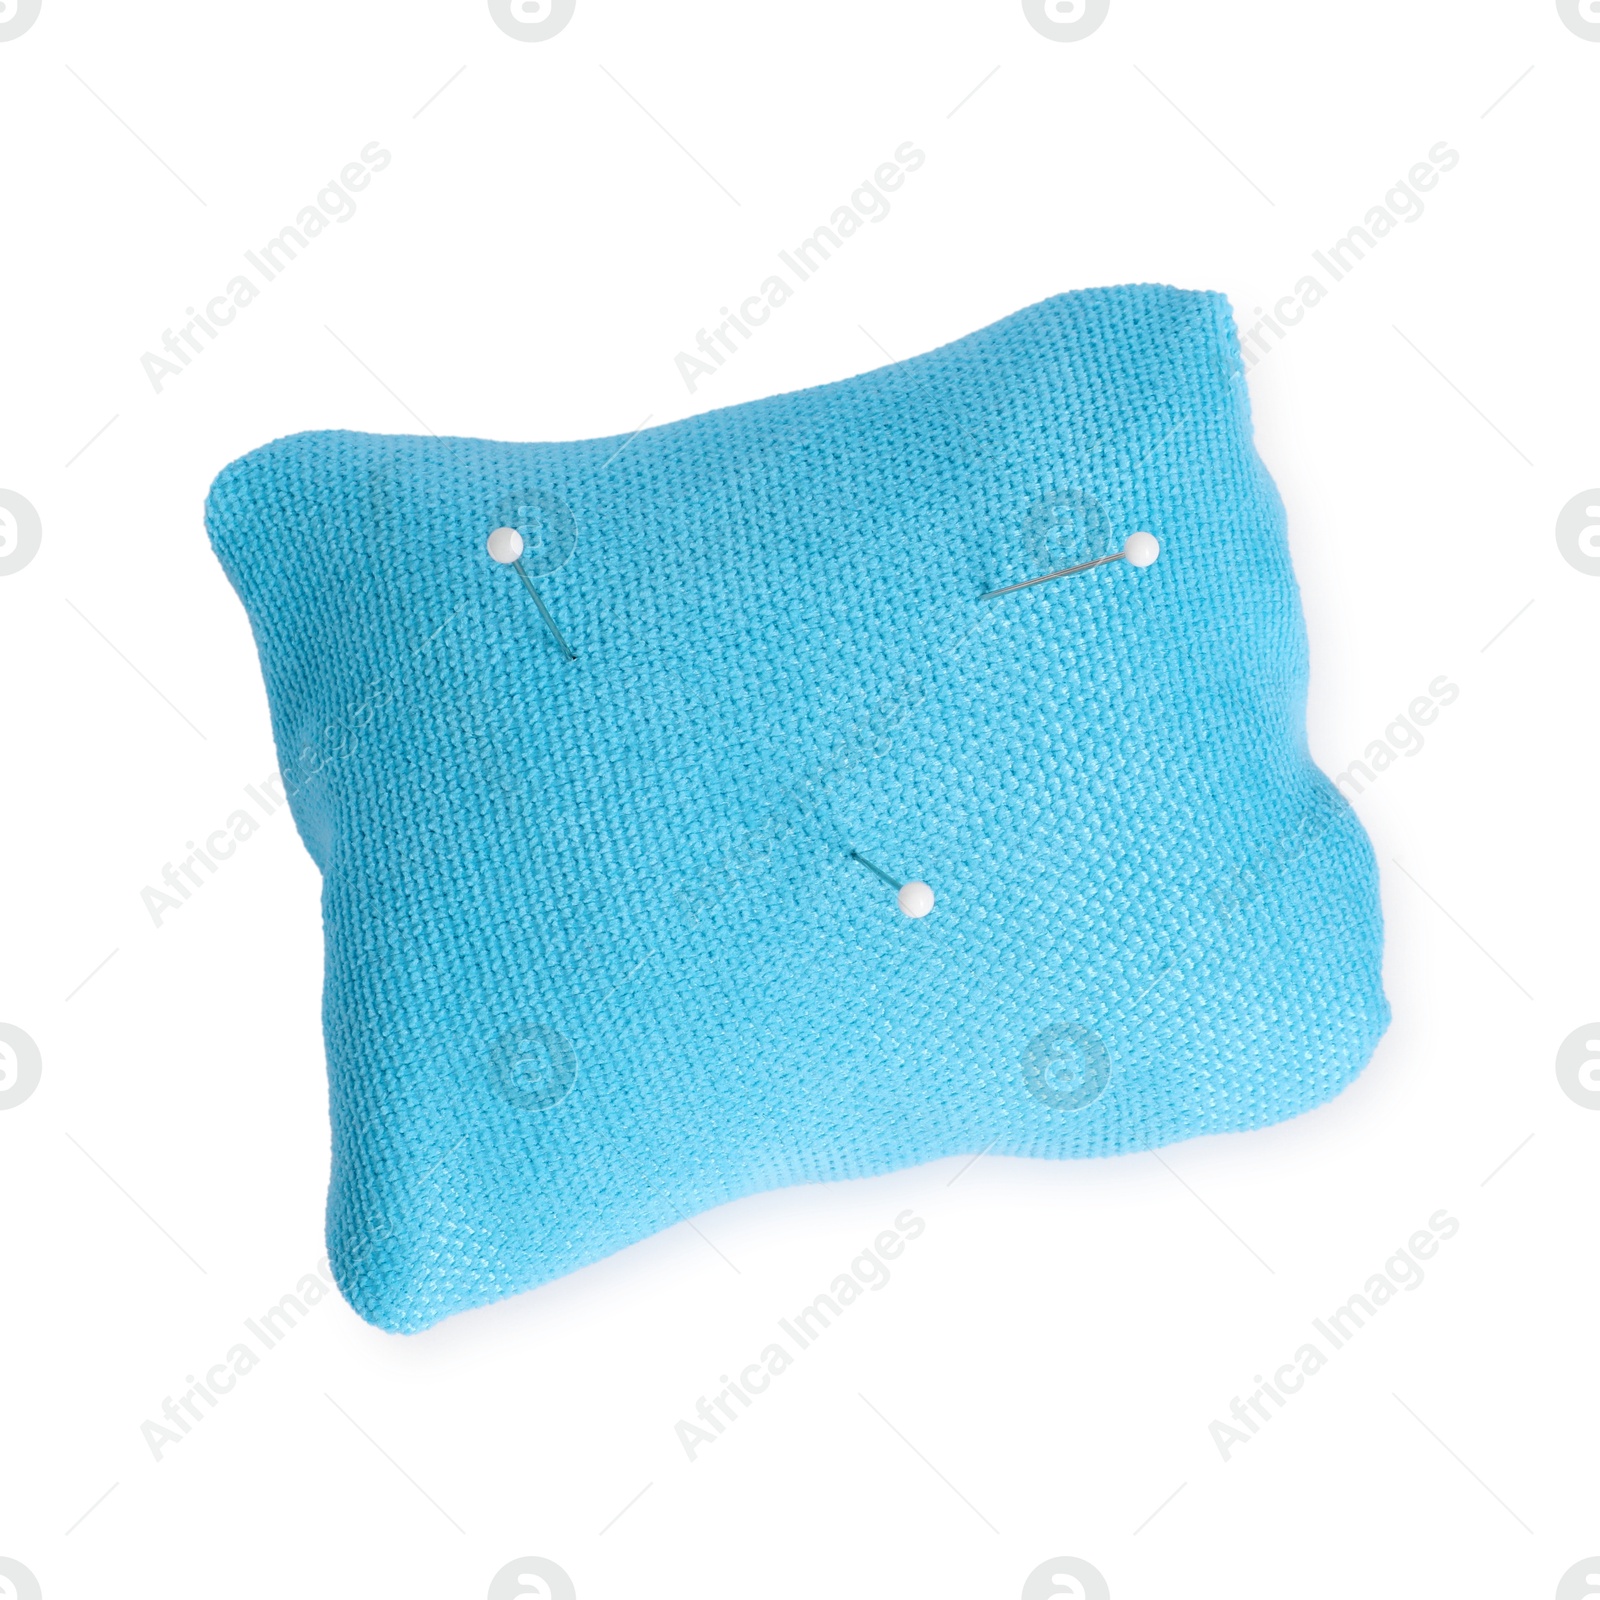 Photo of Light blue pincushion with sewing pins isolated on white, top view